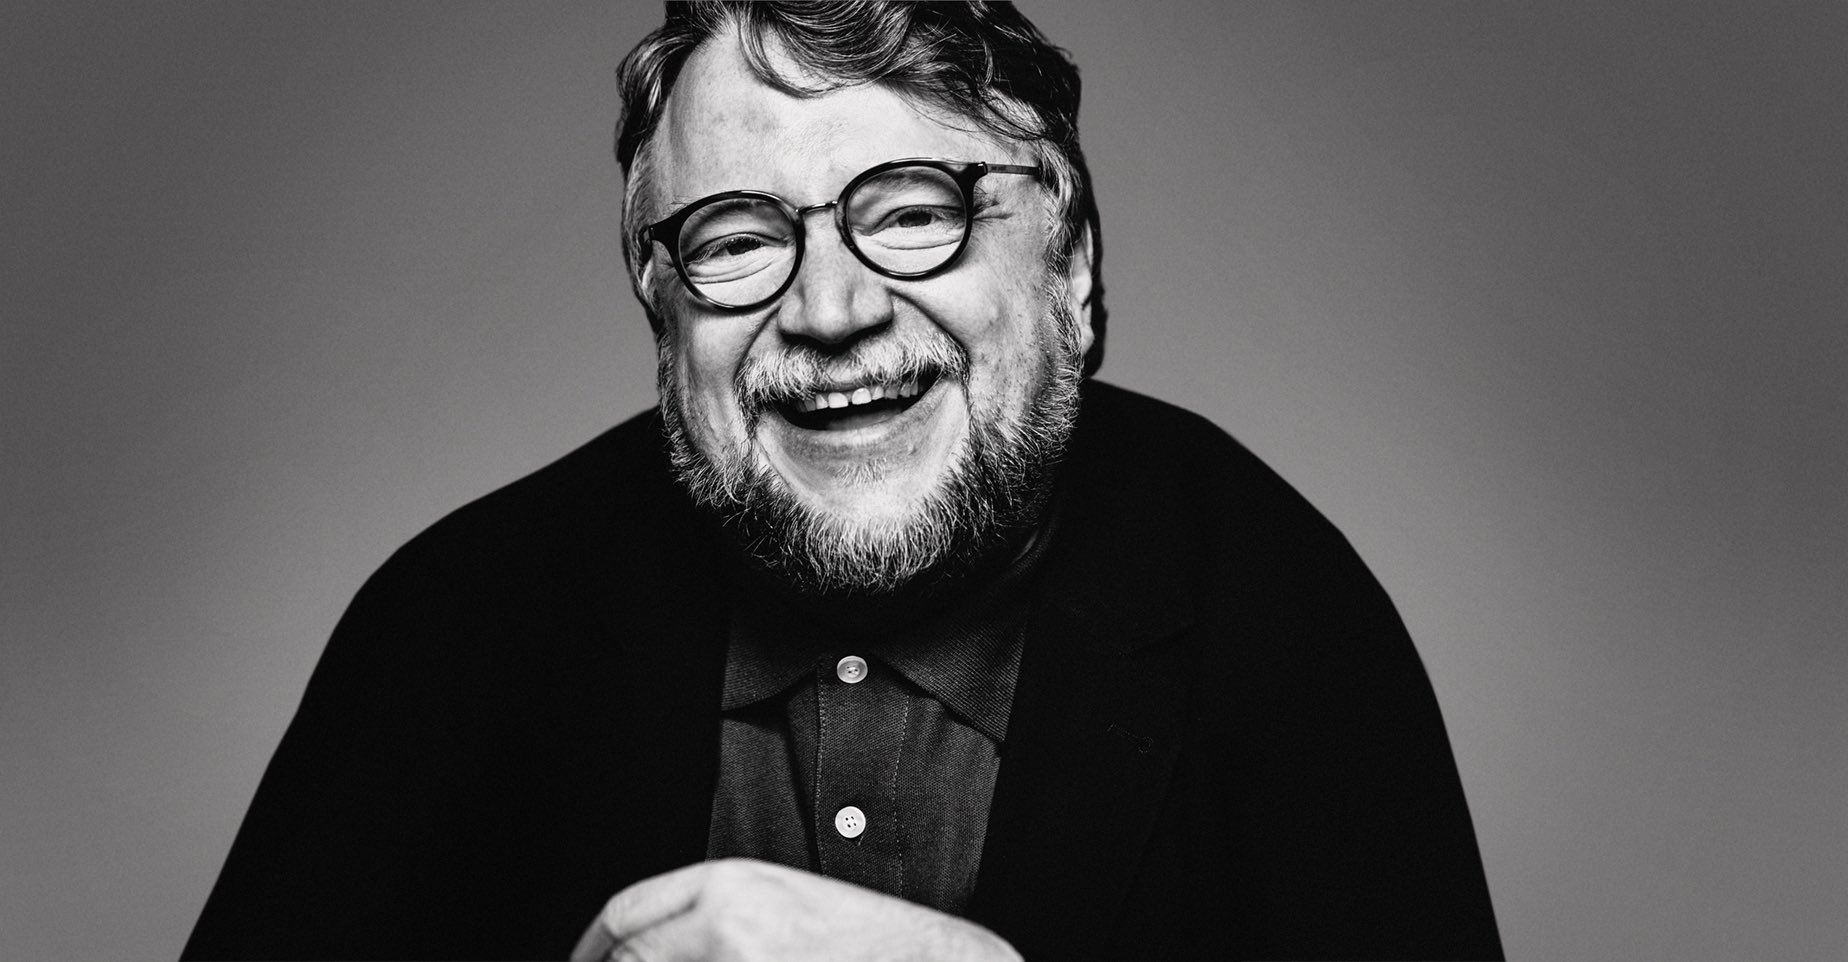 Happy Birthday to the top notch director Guillermo del Toro! He turns 57 today!  